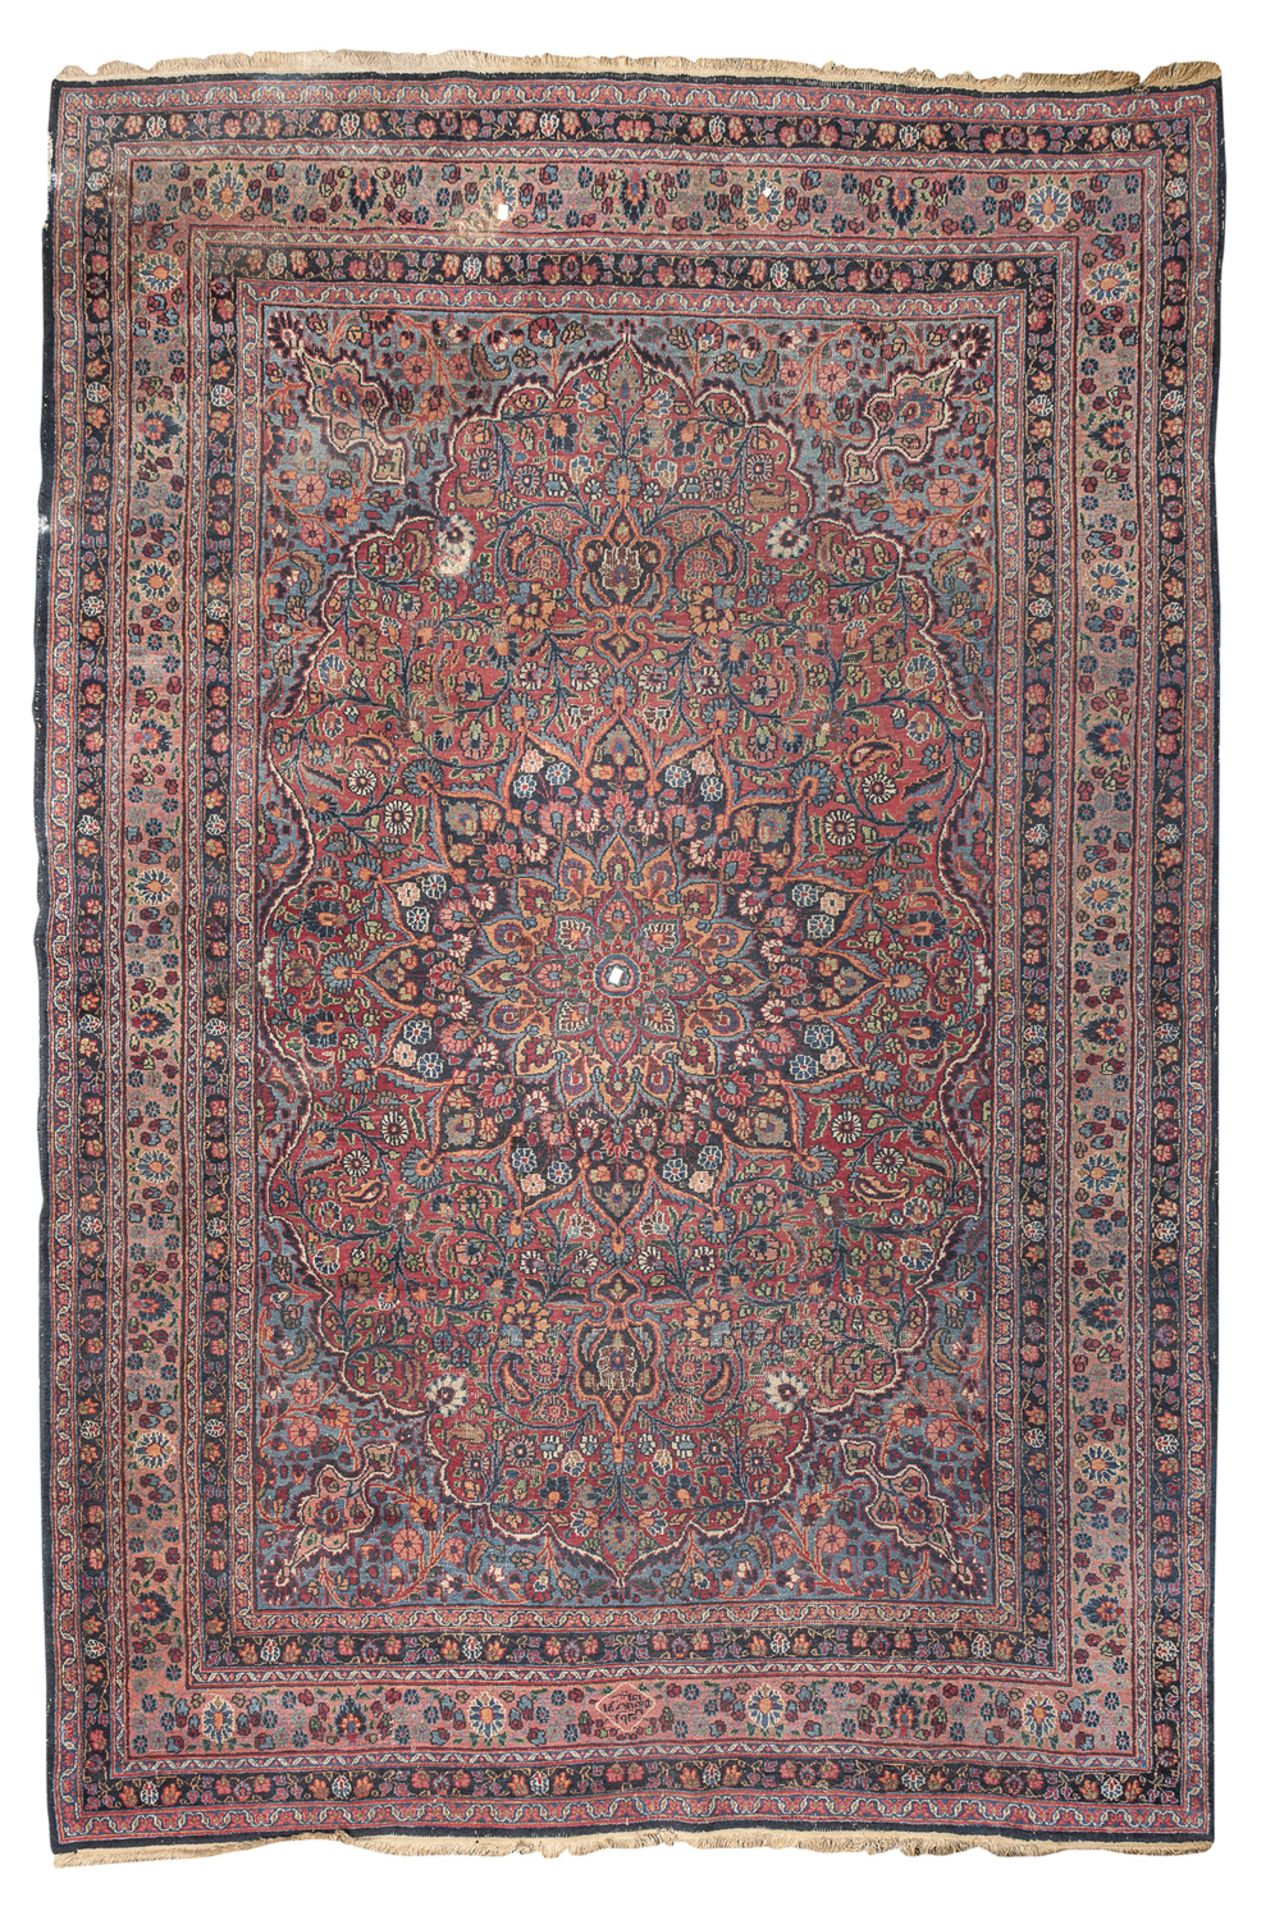 MASHED RUG EARLY 20TH CENTURY